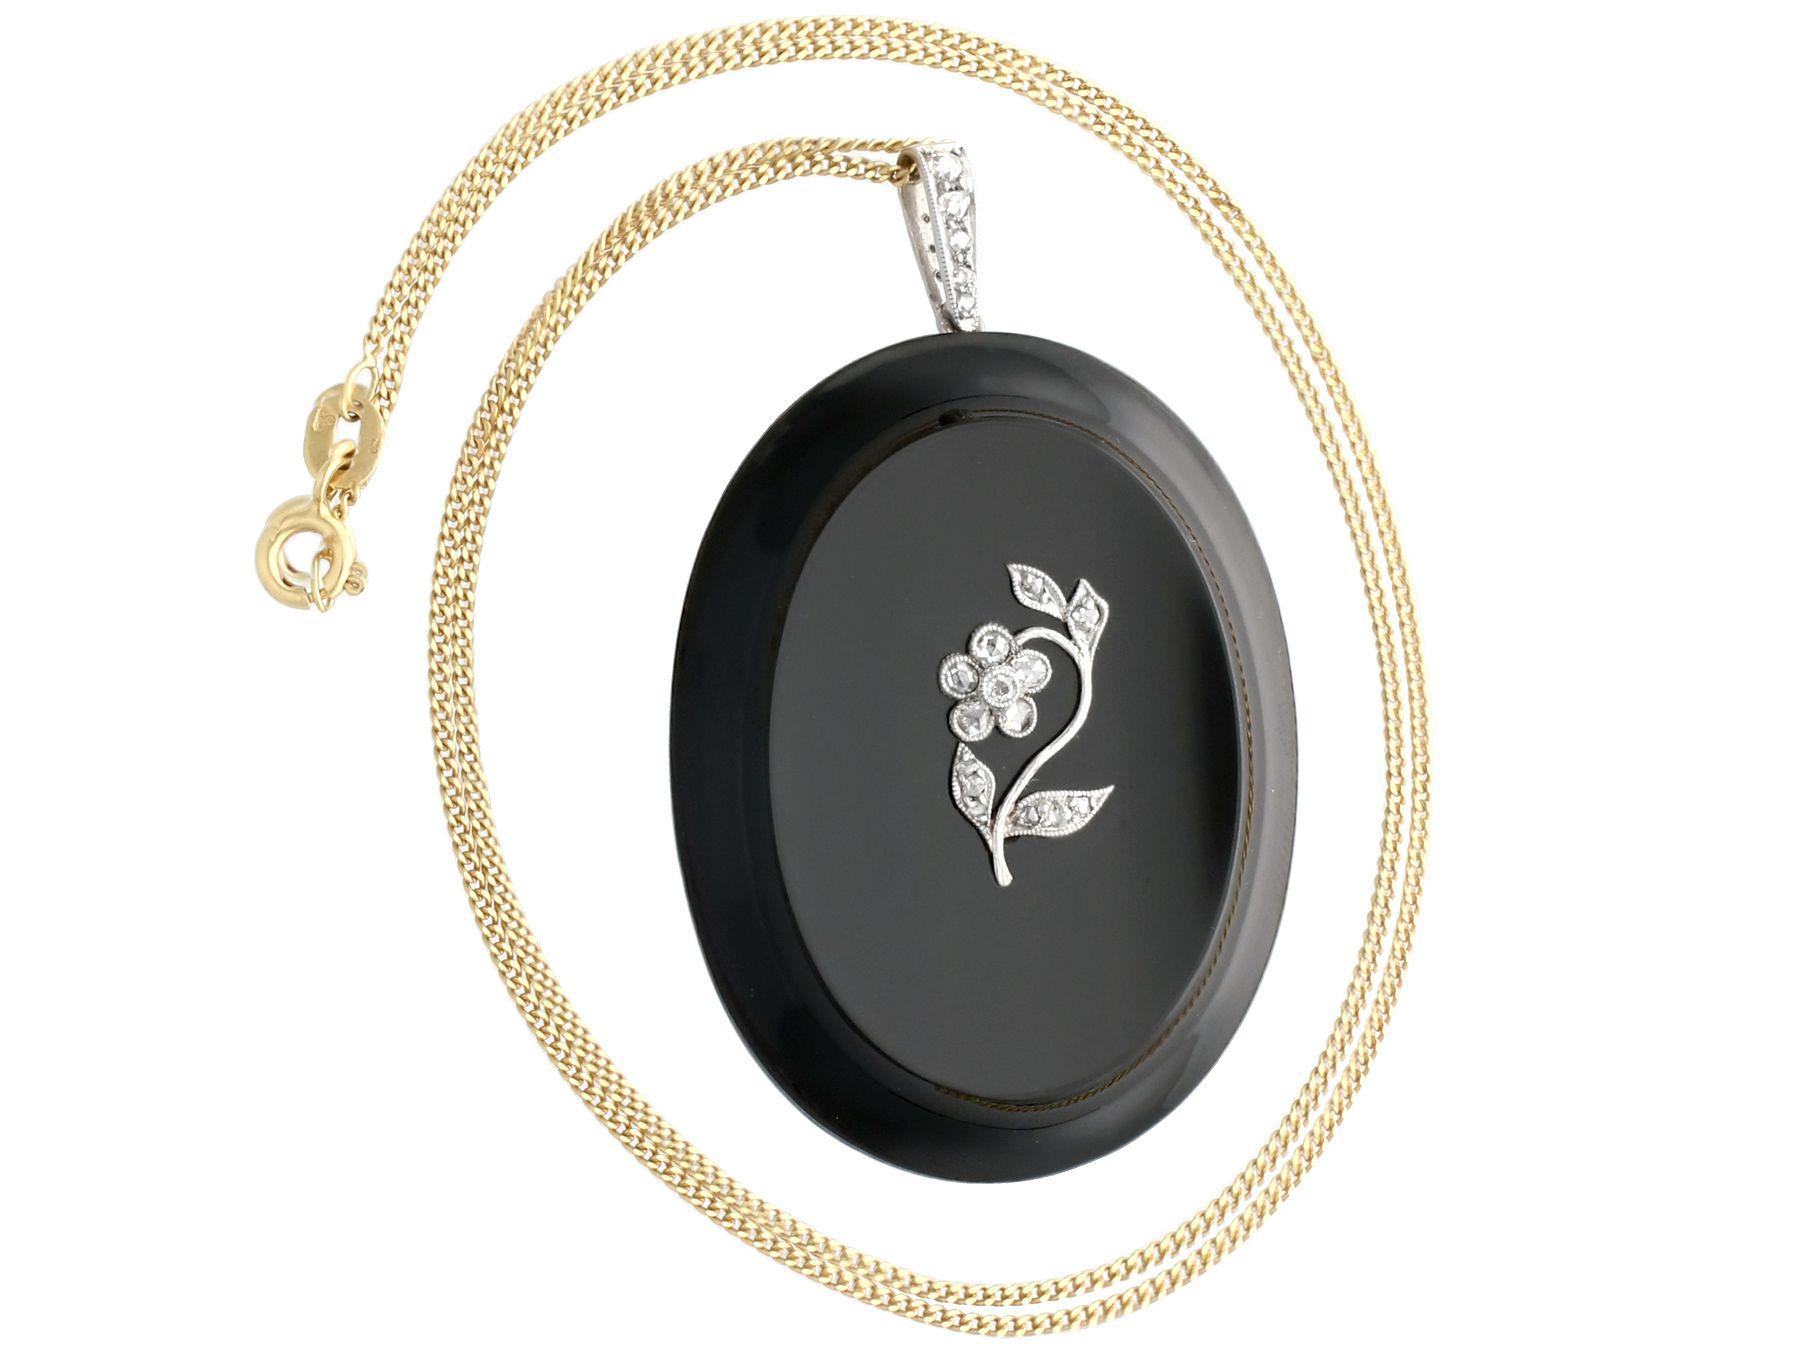 A stunning, fine and impressive antique black onyx and 0.23 carat diamond, 18 karat white and yellow gold pendant; part of our diverse Victorian gemstone jewelry and estate jewelry collections.

This stunning Victorian pendant has been crafted in